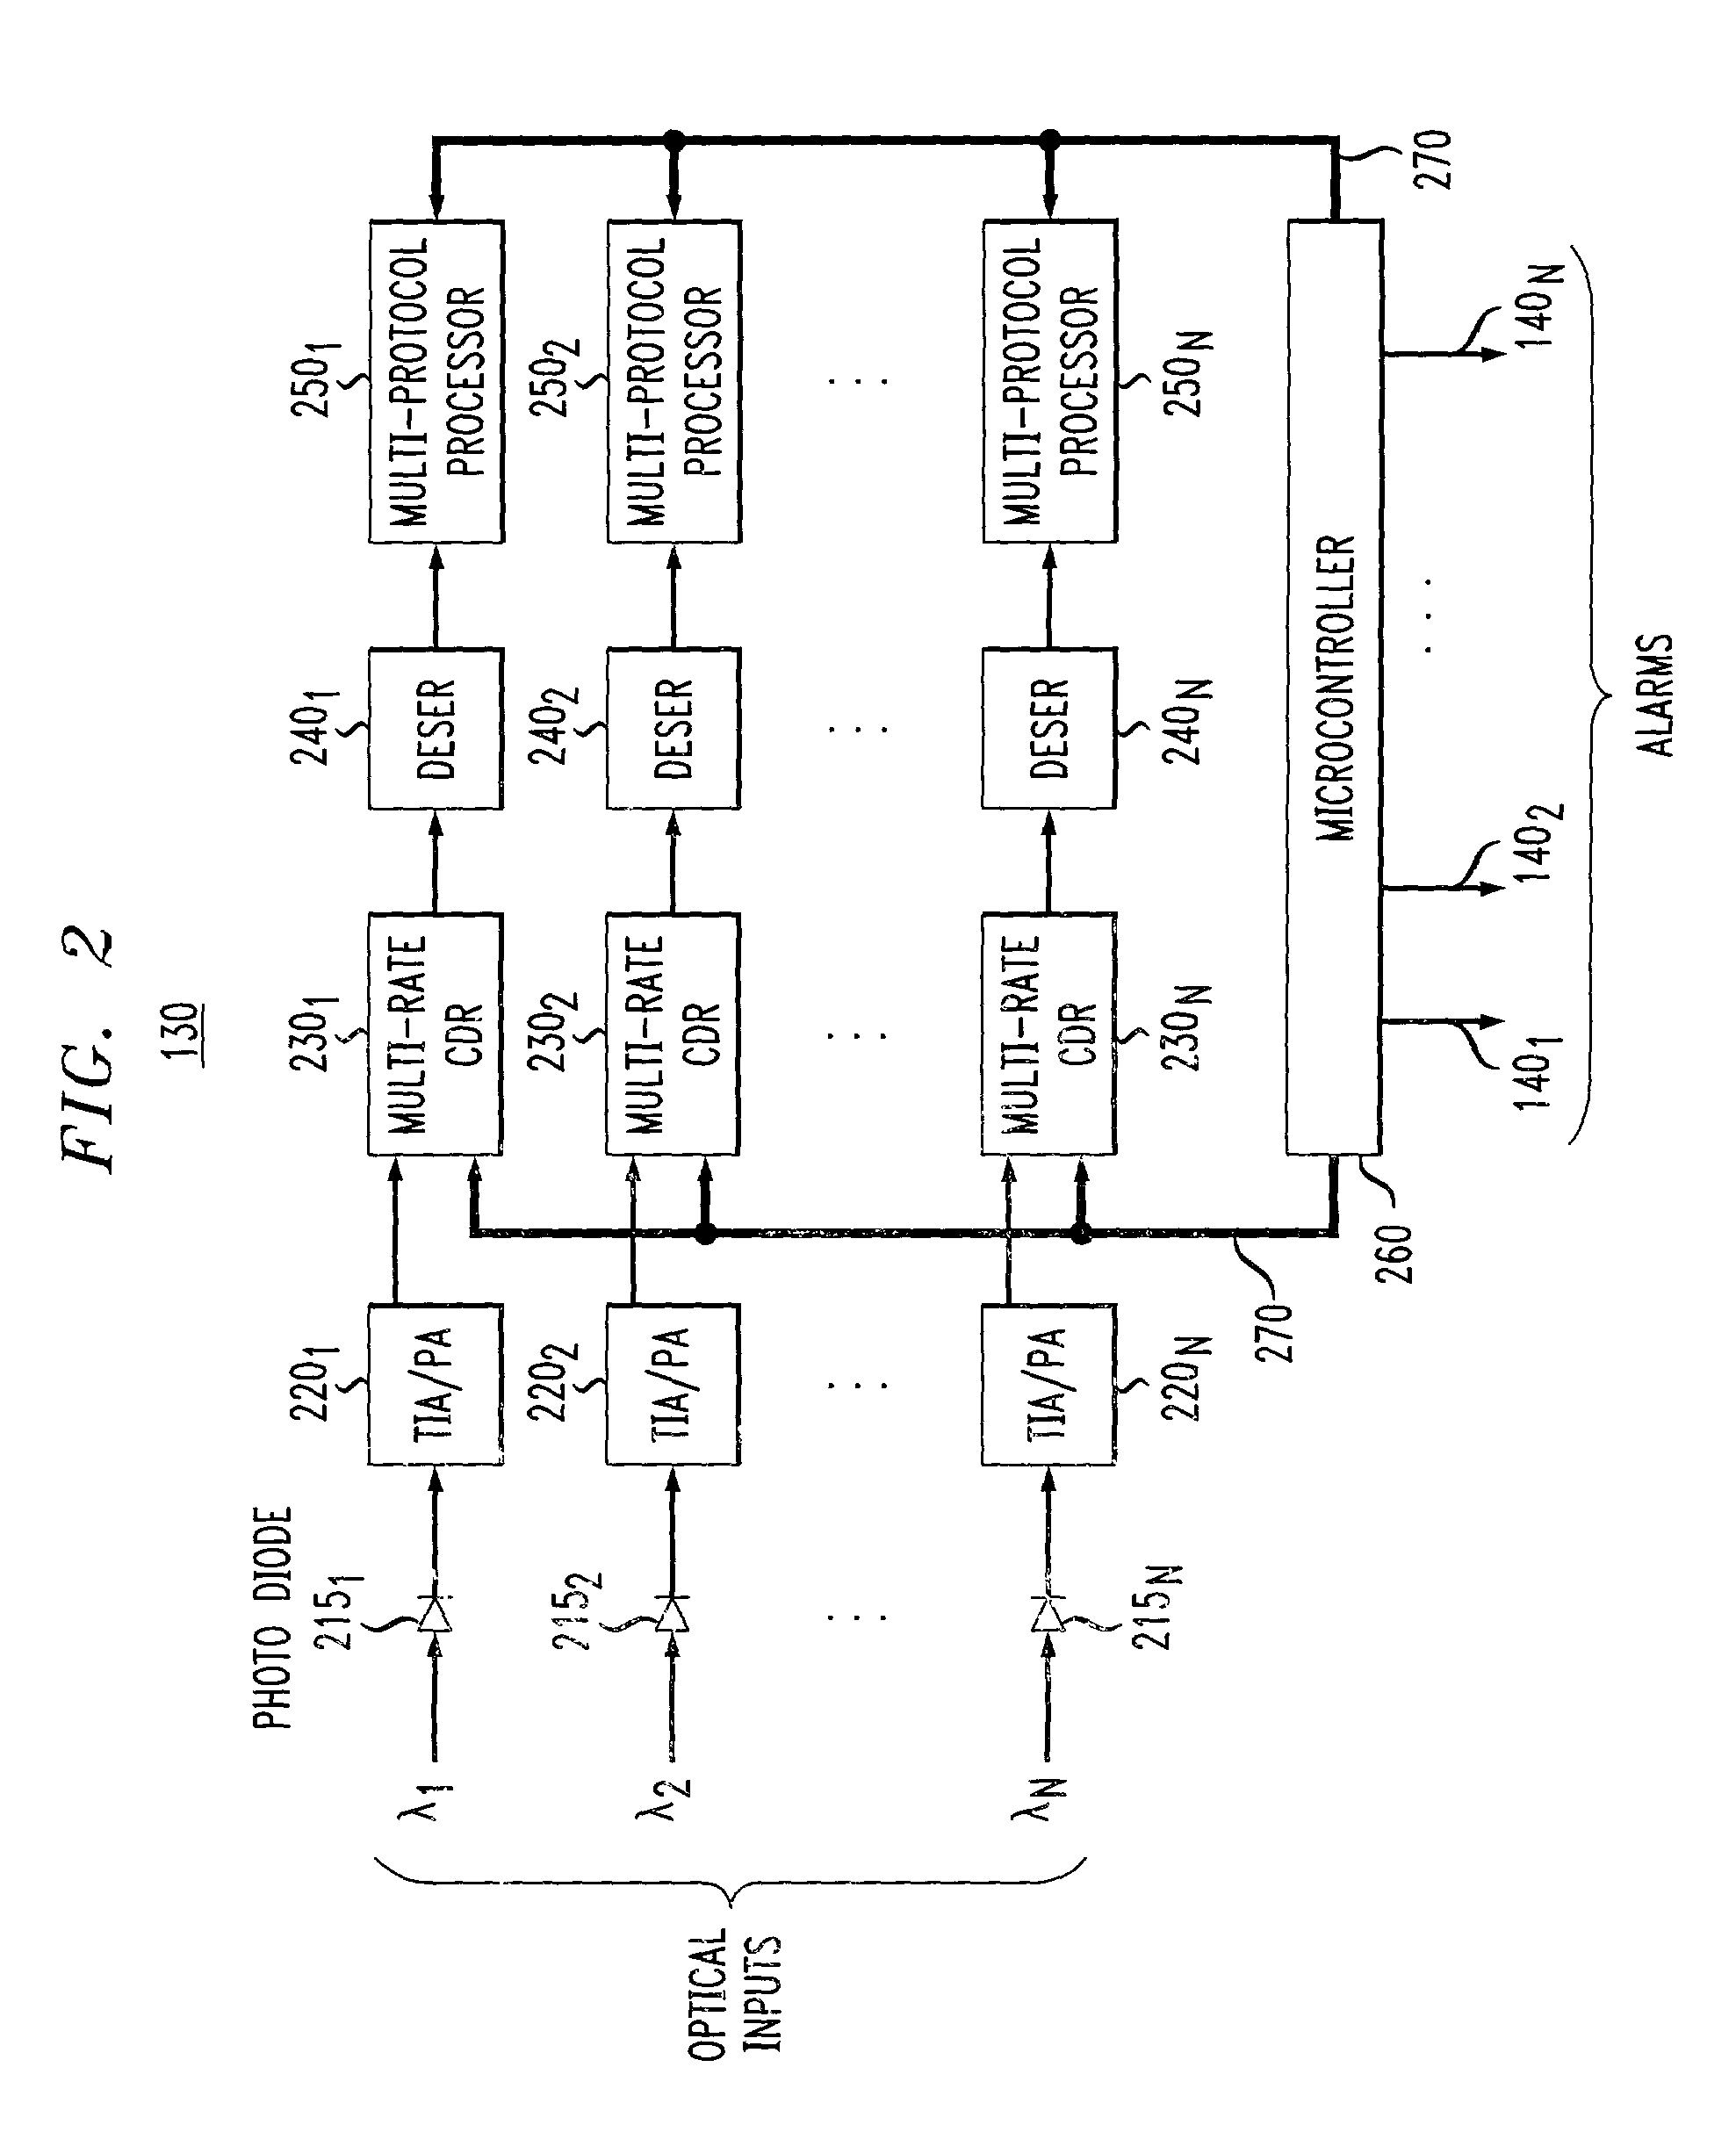 Method and apparatus for multi-protocol and multi-rate optical channel performance monitoring